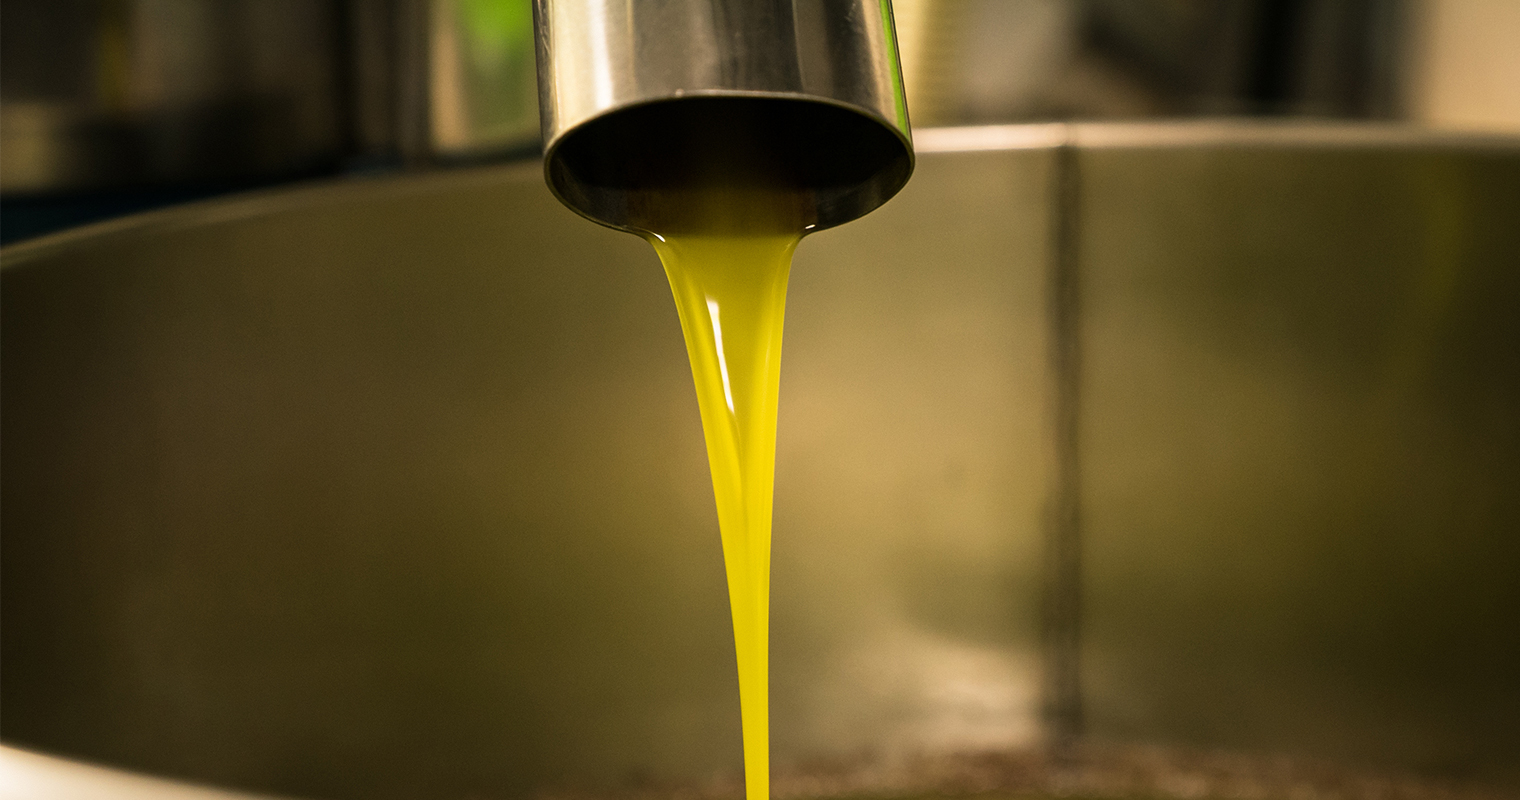 pure oil extracted is poured into a tank